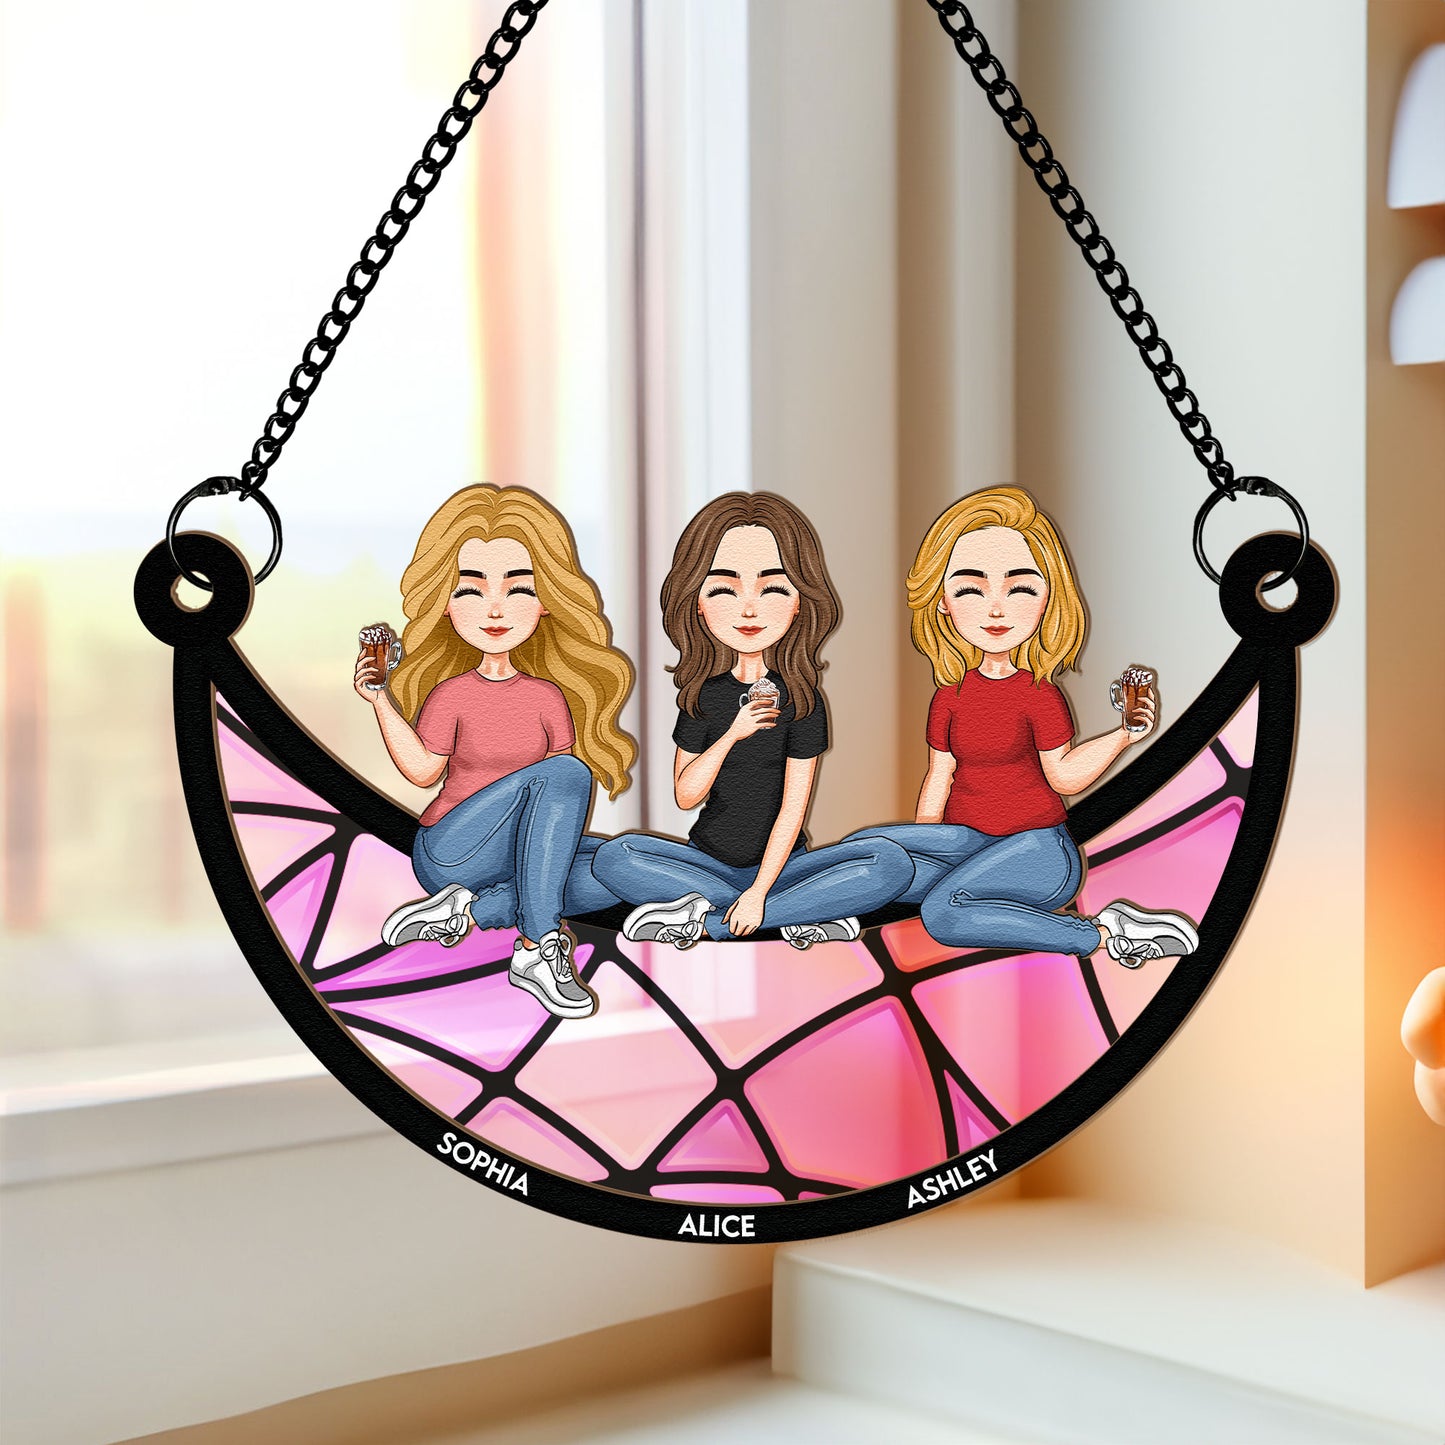 Best Friends Sitting On The Moon - Personalized Window Hanging Suncatcher Ornament